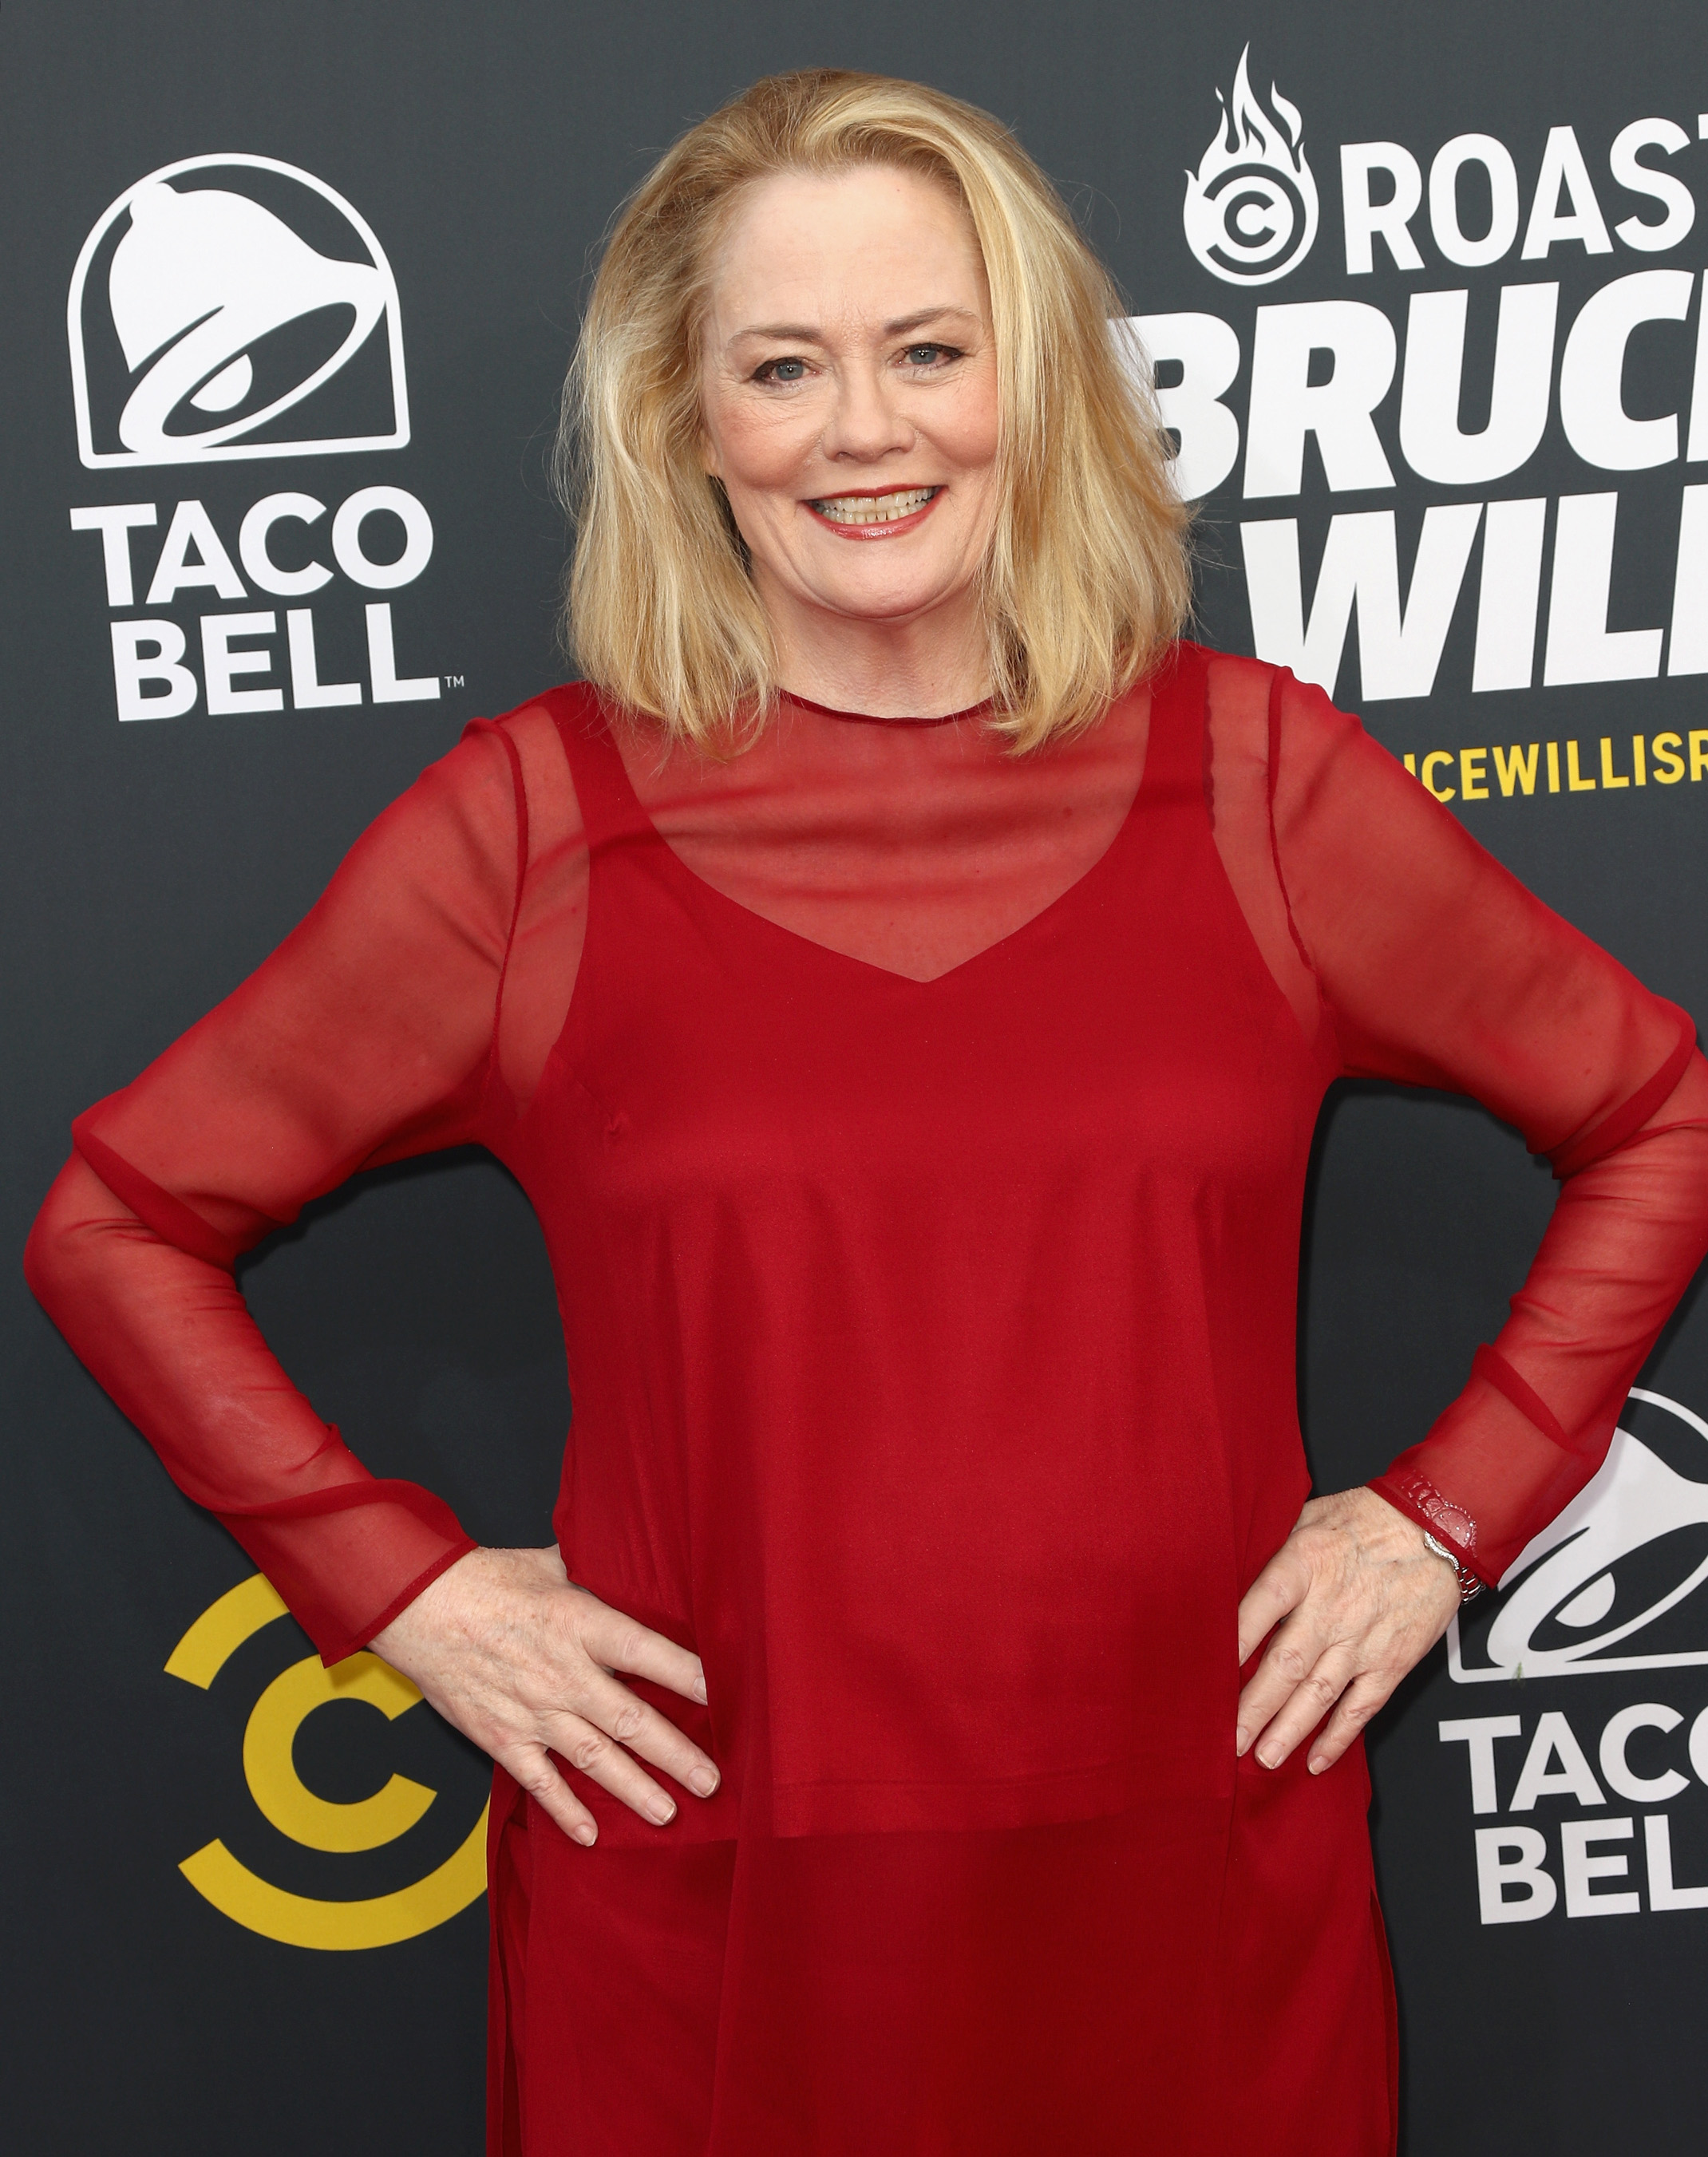 Cybill Shepherd attends the Comedy Central Roast of Bruce Willis at Hollywood Palladium on July 14, 2018, in Los Angeles, California. | Source: Getty Images